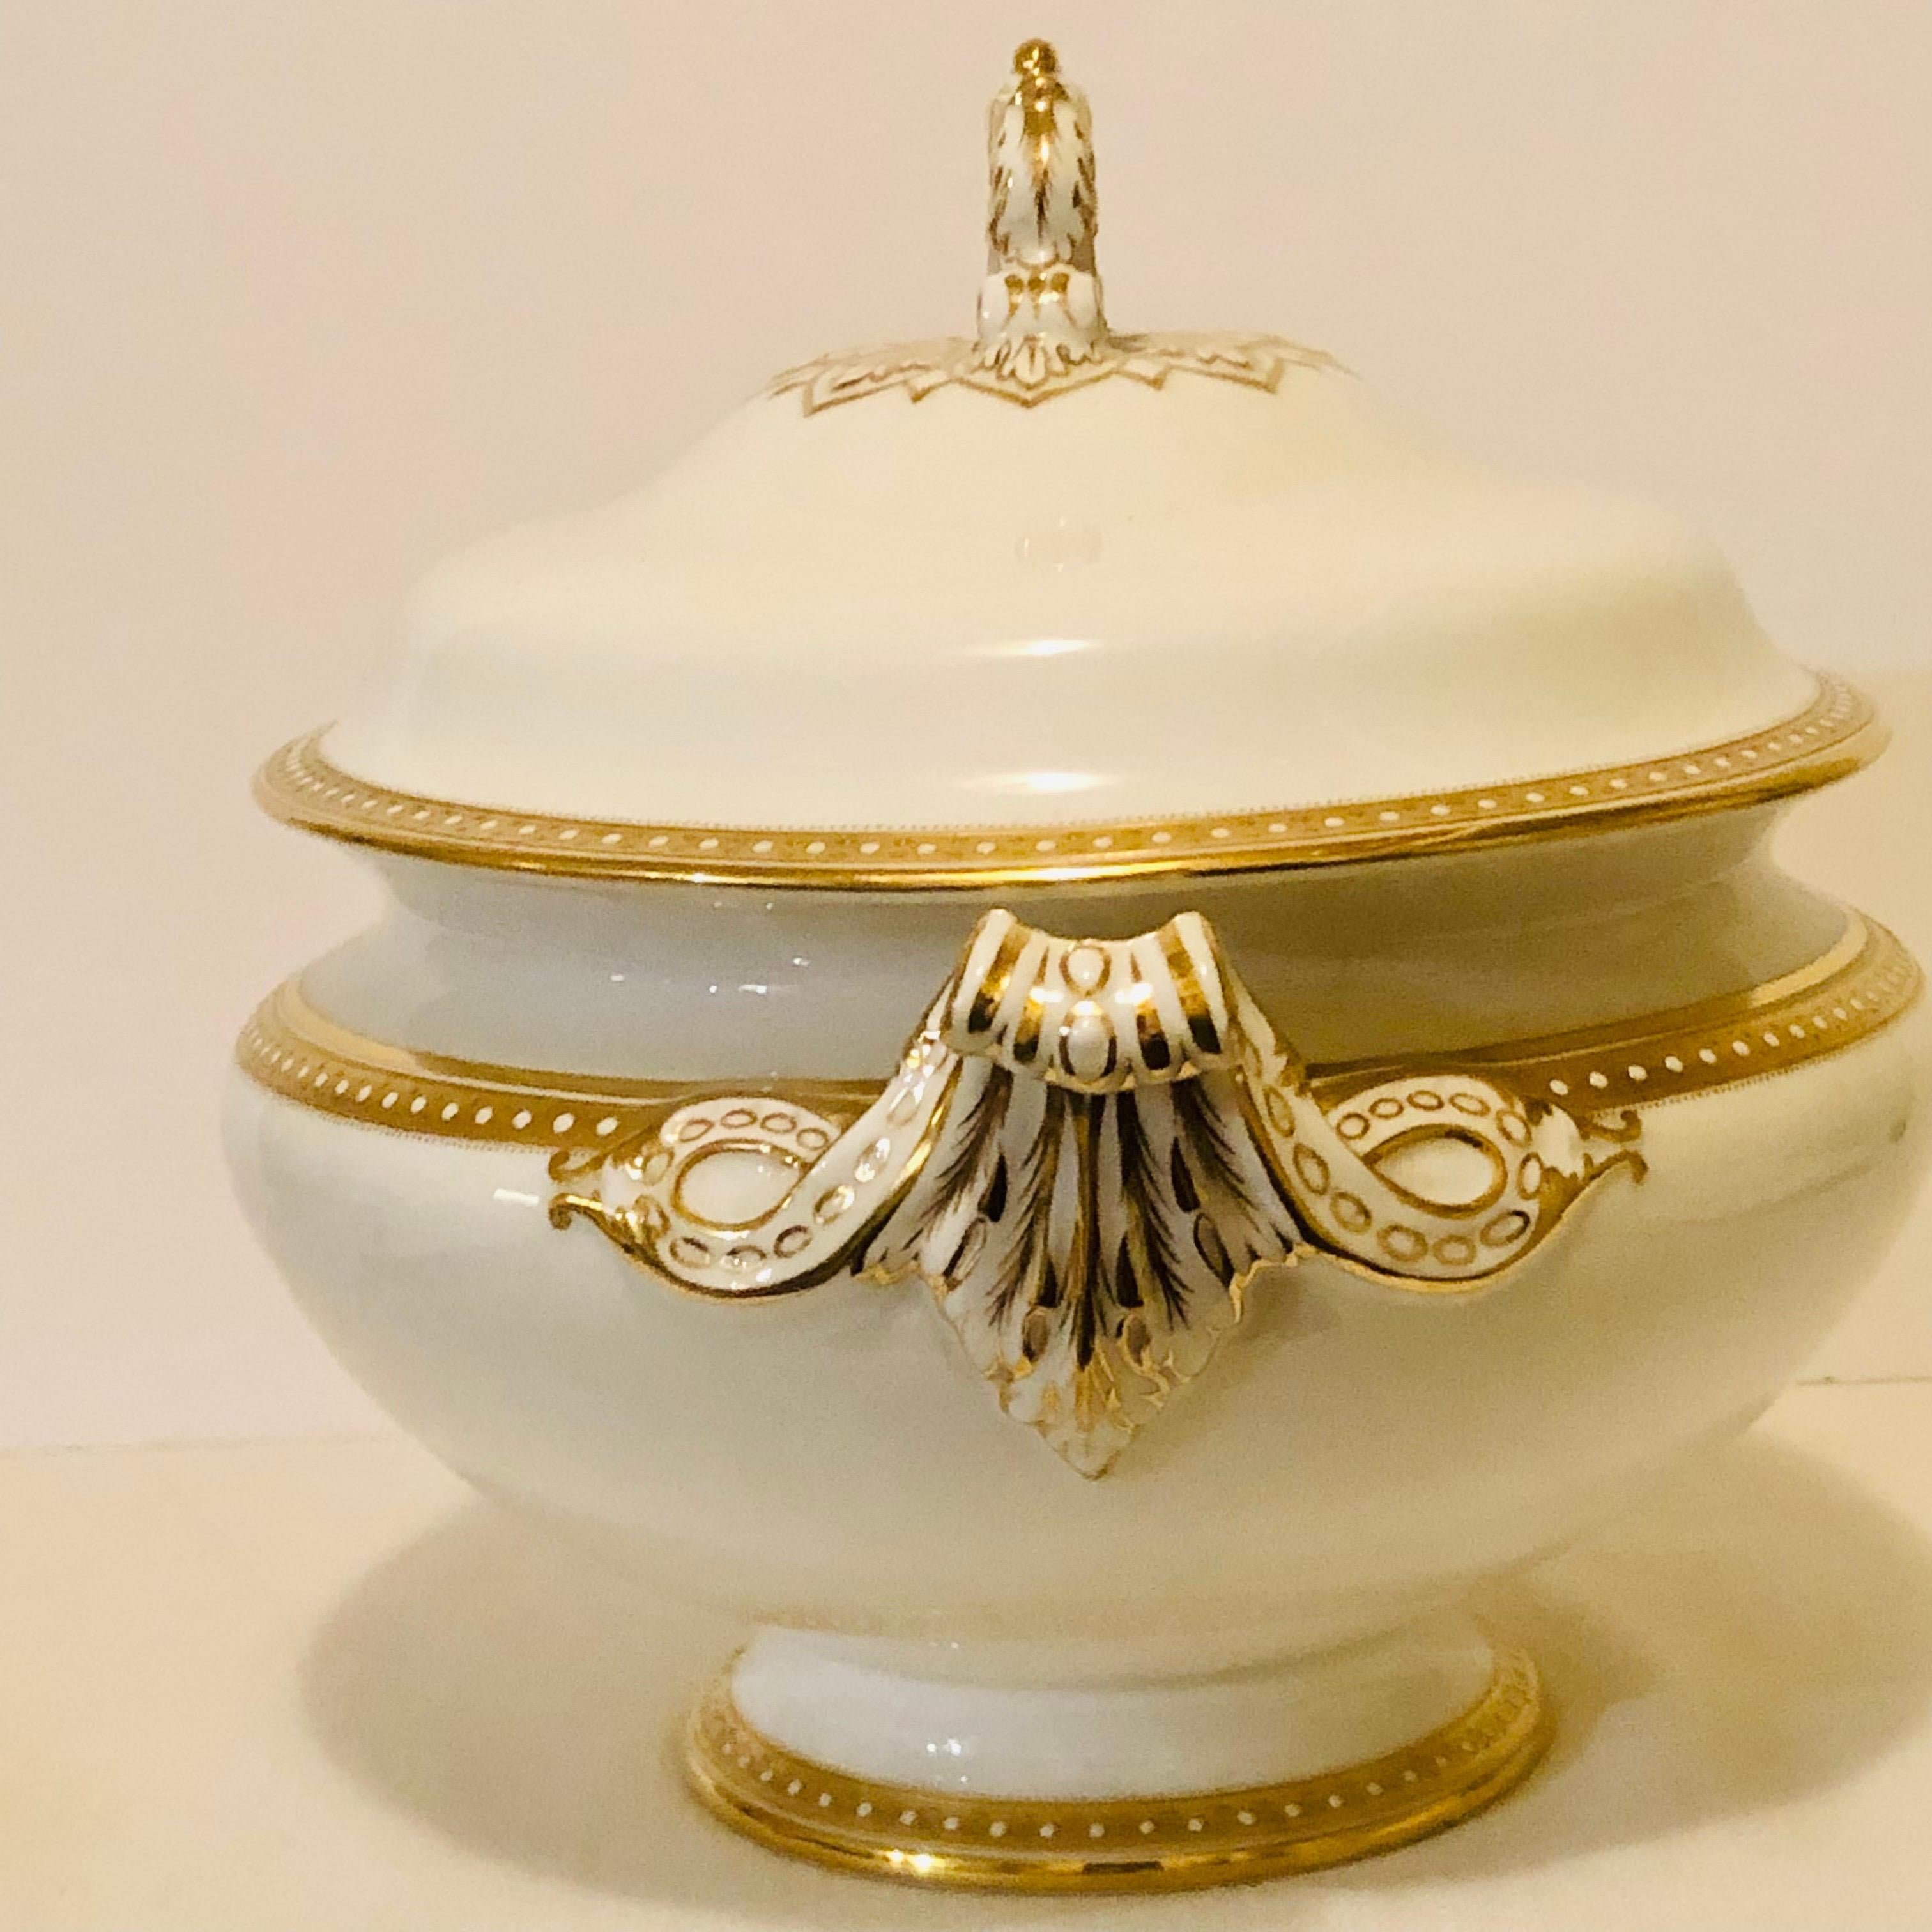 Gilt Copeland Spode Soup Tureen with Gold Border and White Jeweling Made for T. Goode